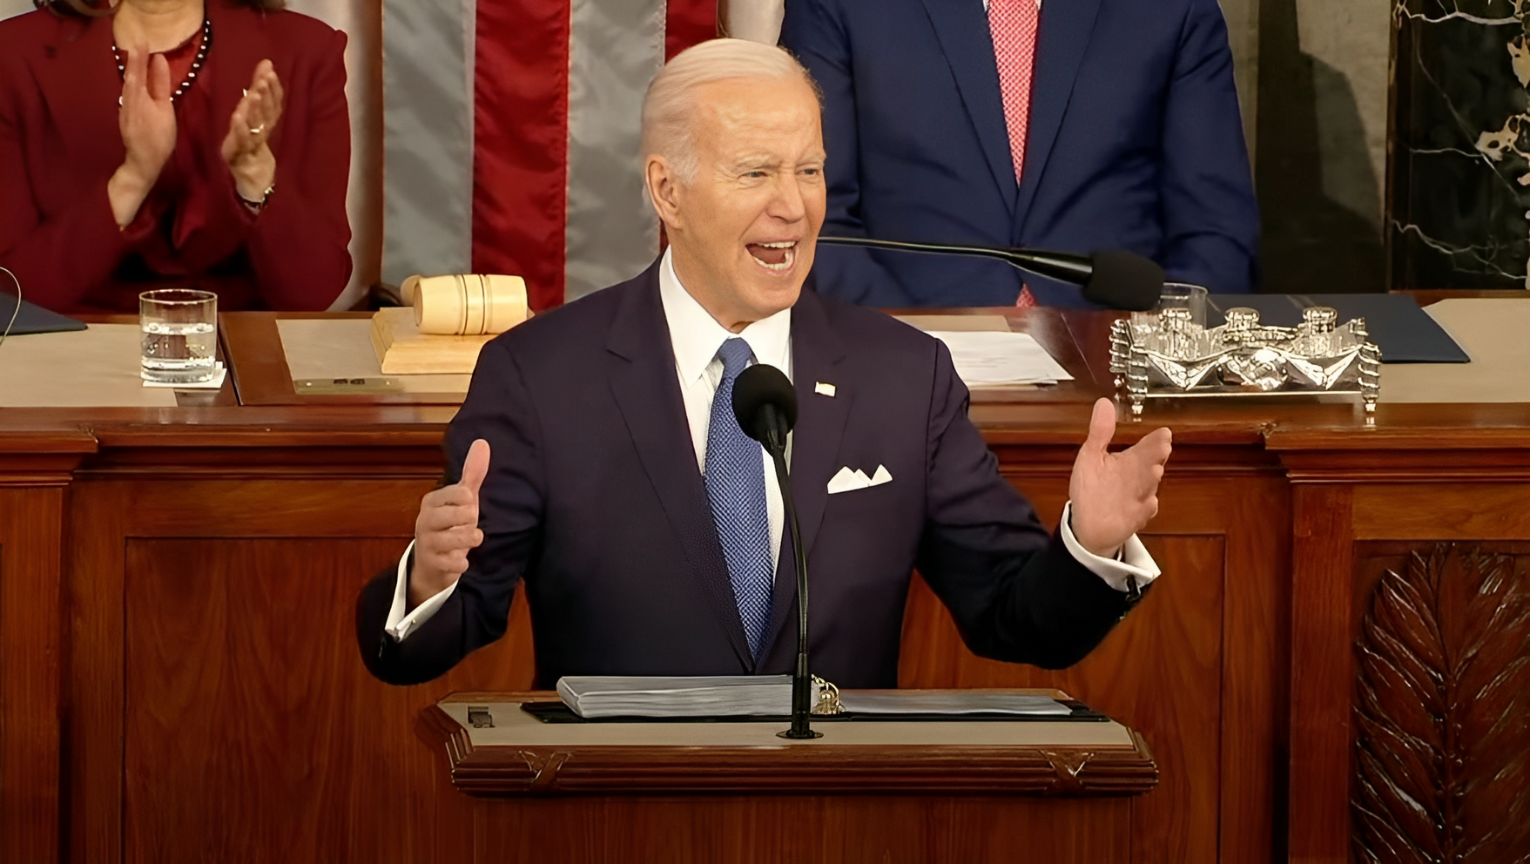 Biden targets social media companies during State of the Union address